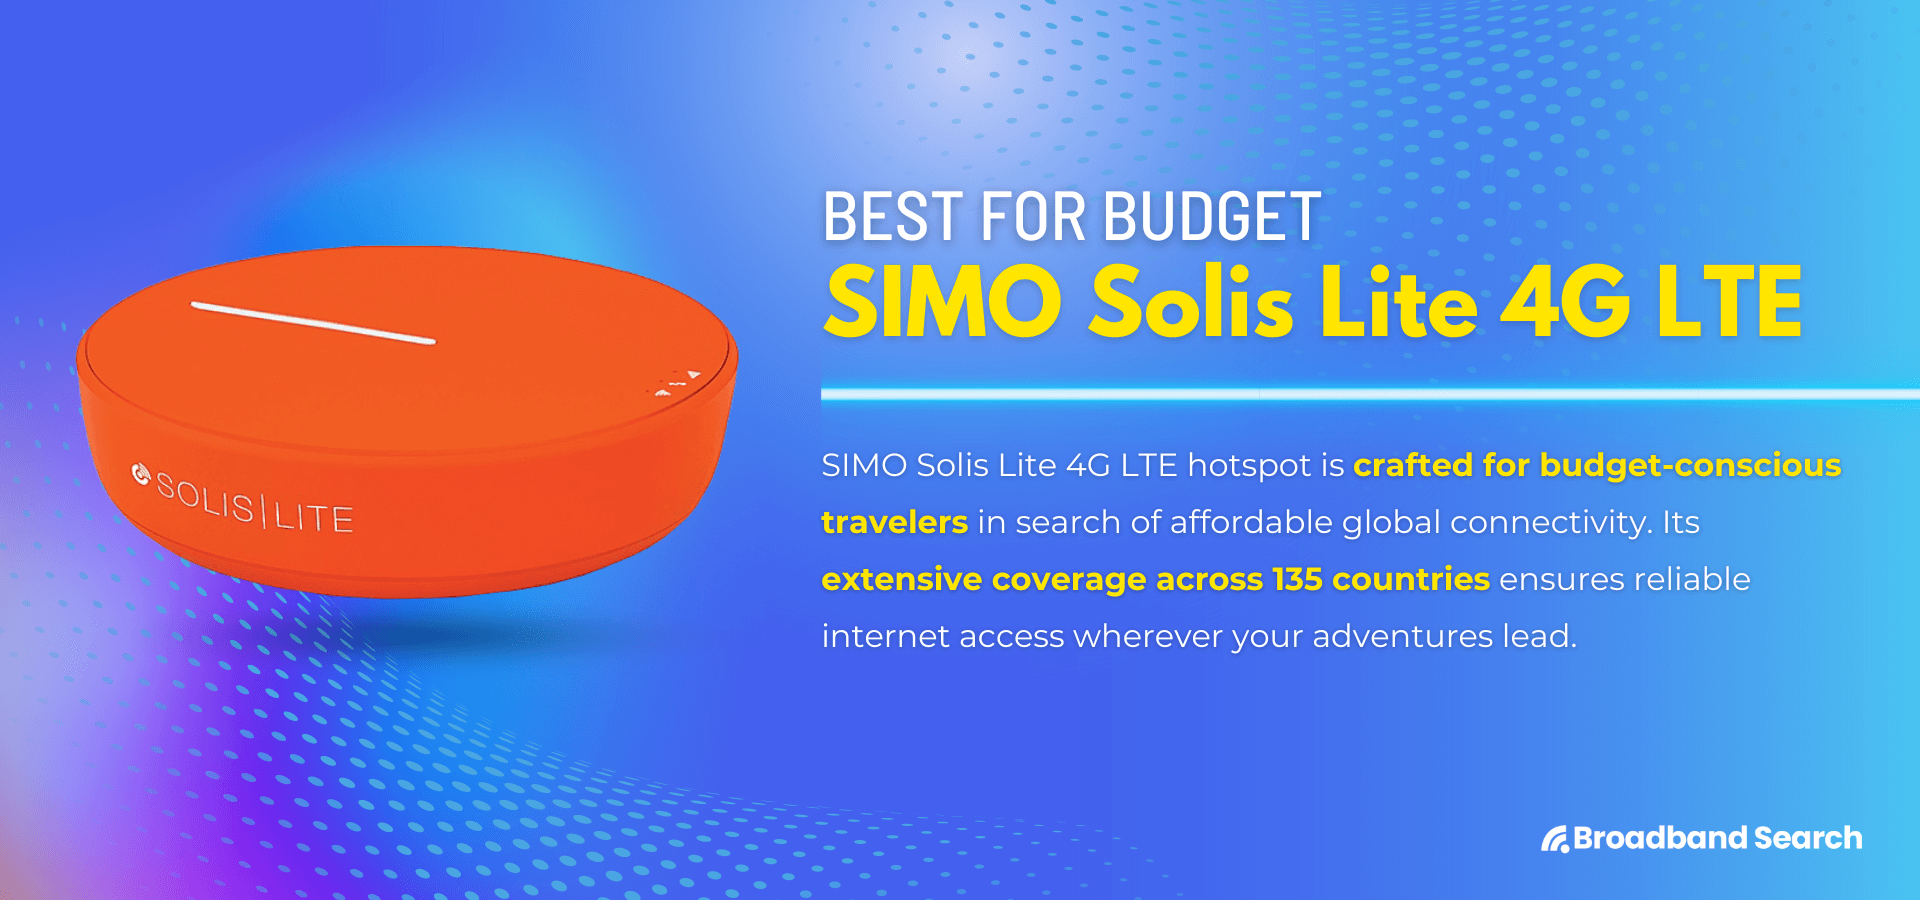 Product details of the mobile hotspot SIMO Solis Lite 4G LTE